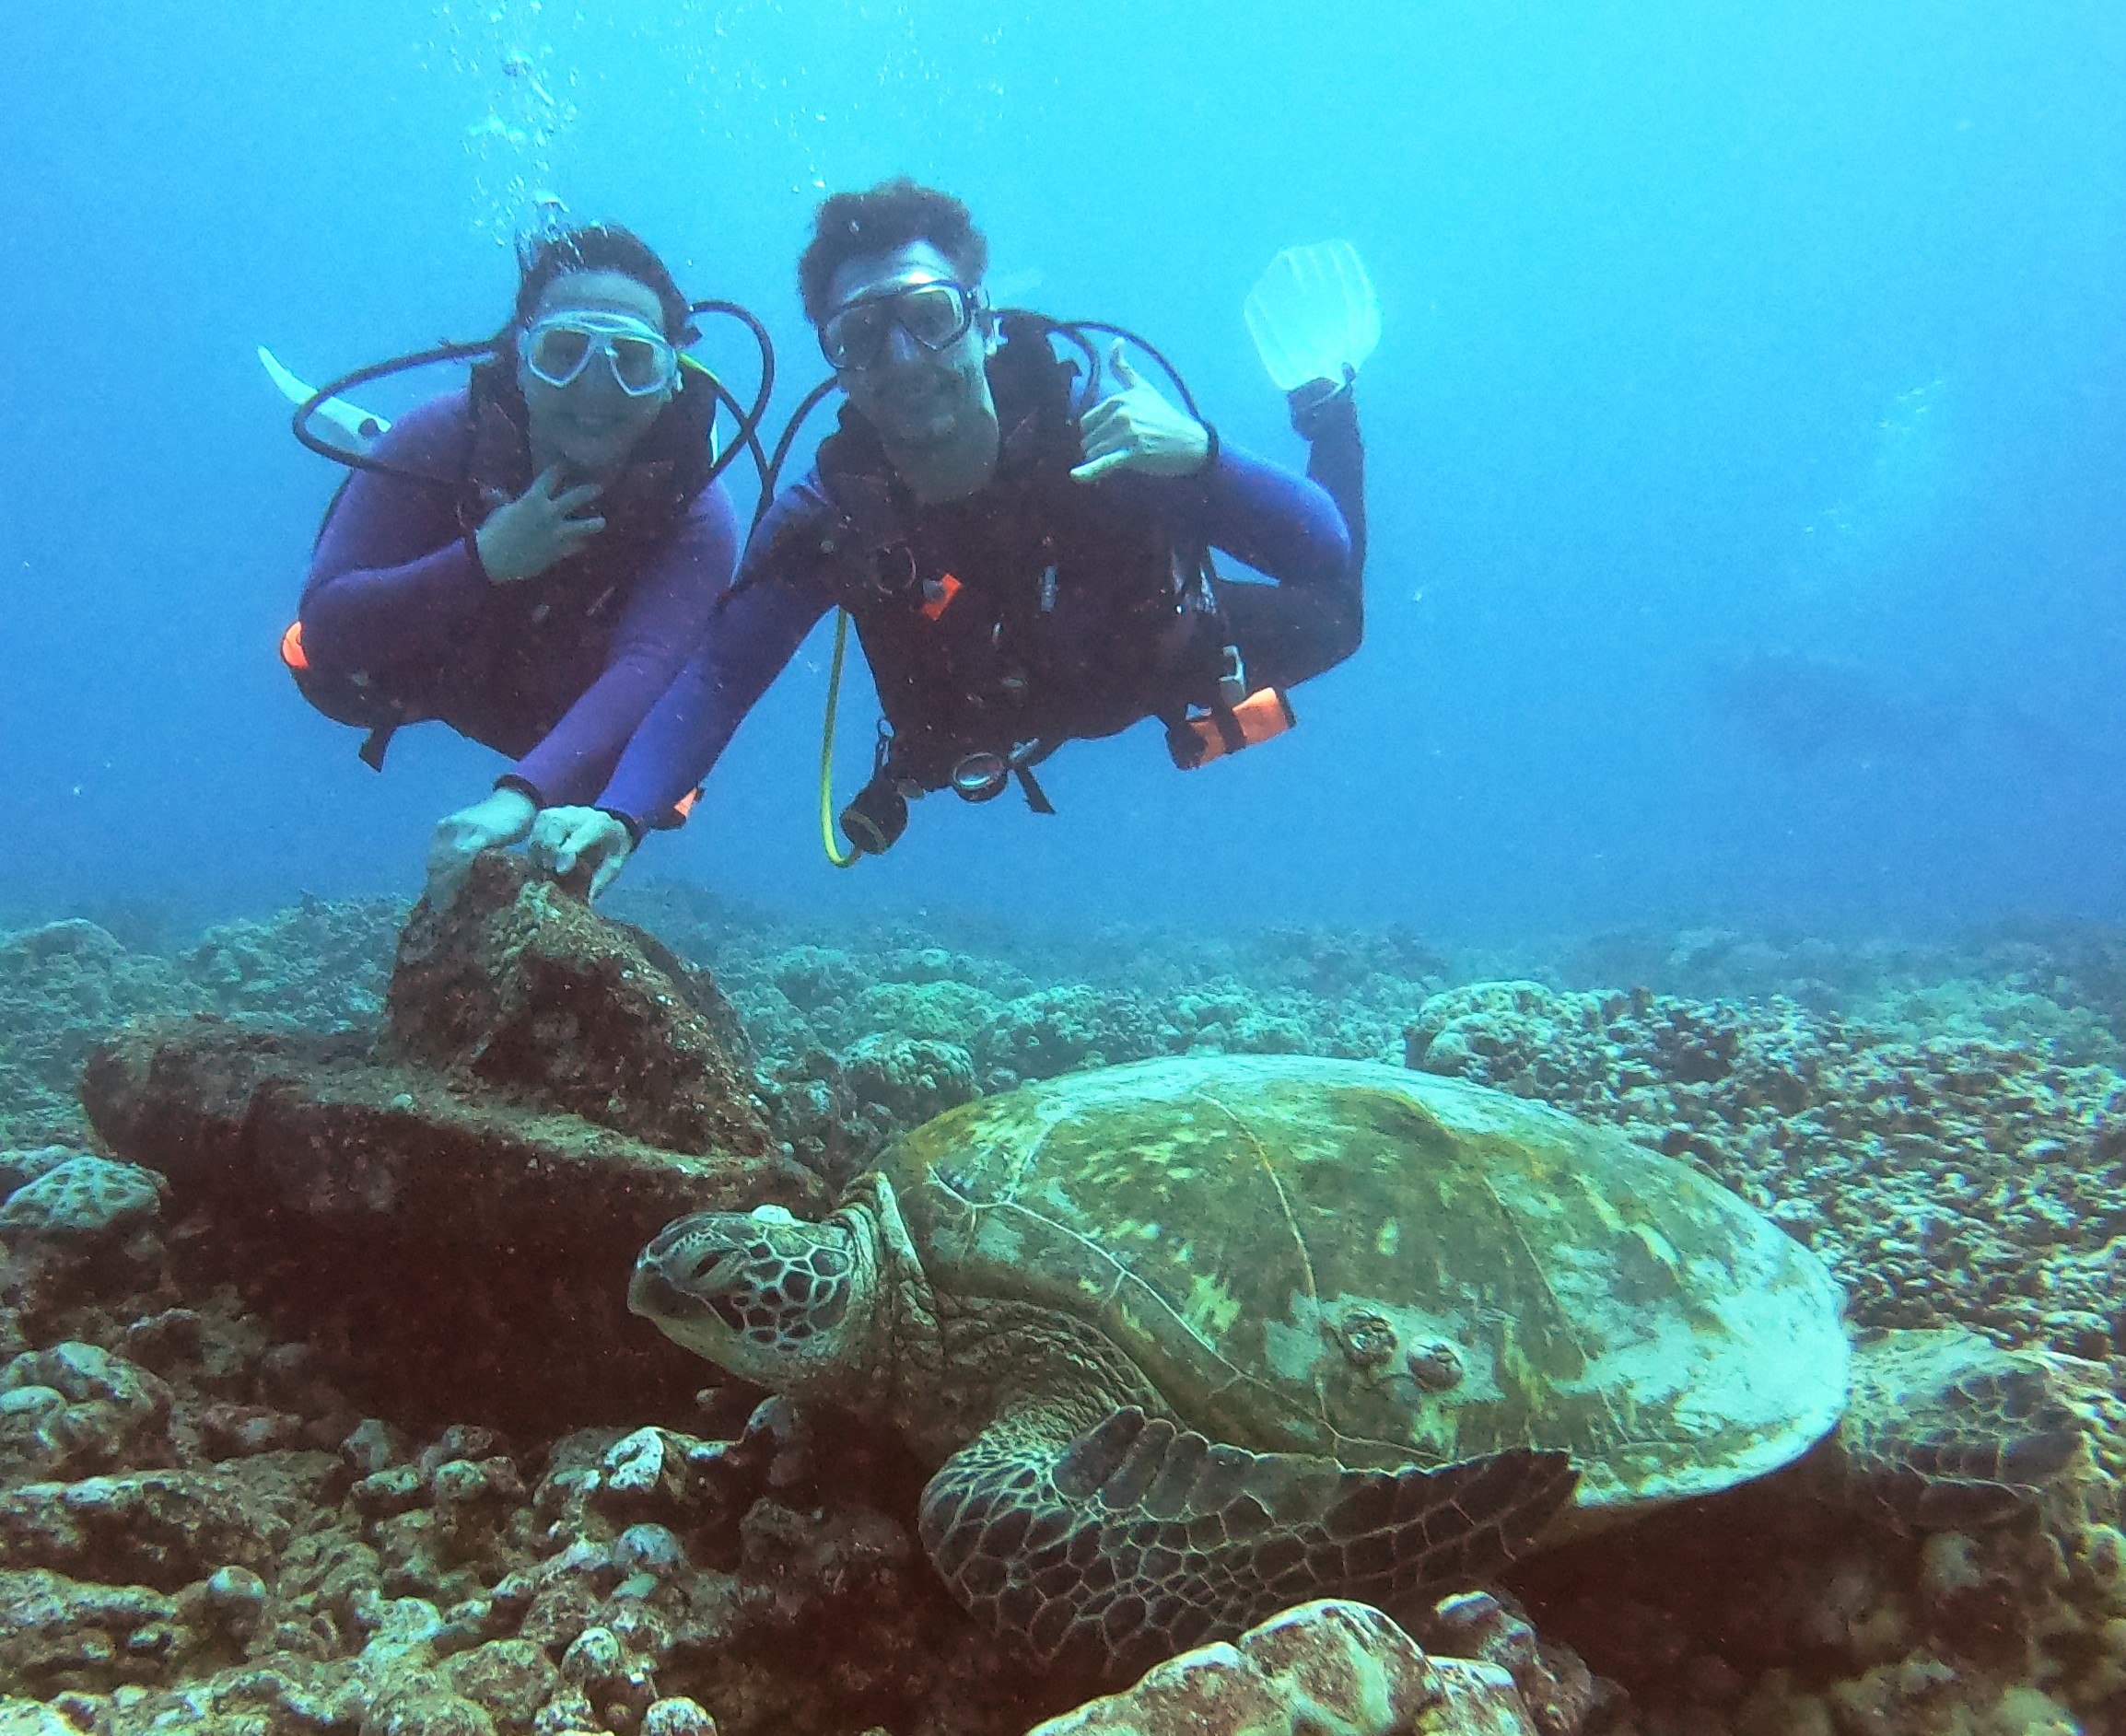 Two days of diving with Honolulu Honu Divers